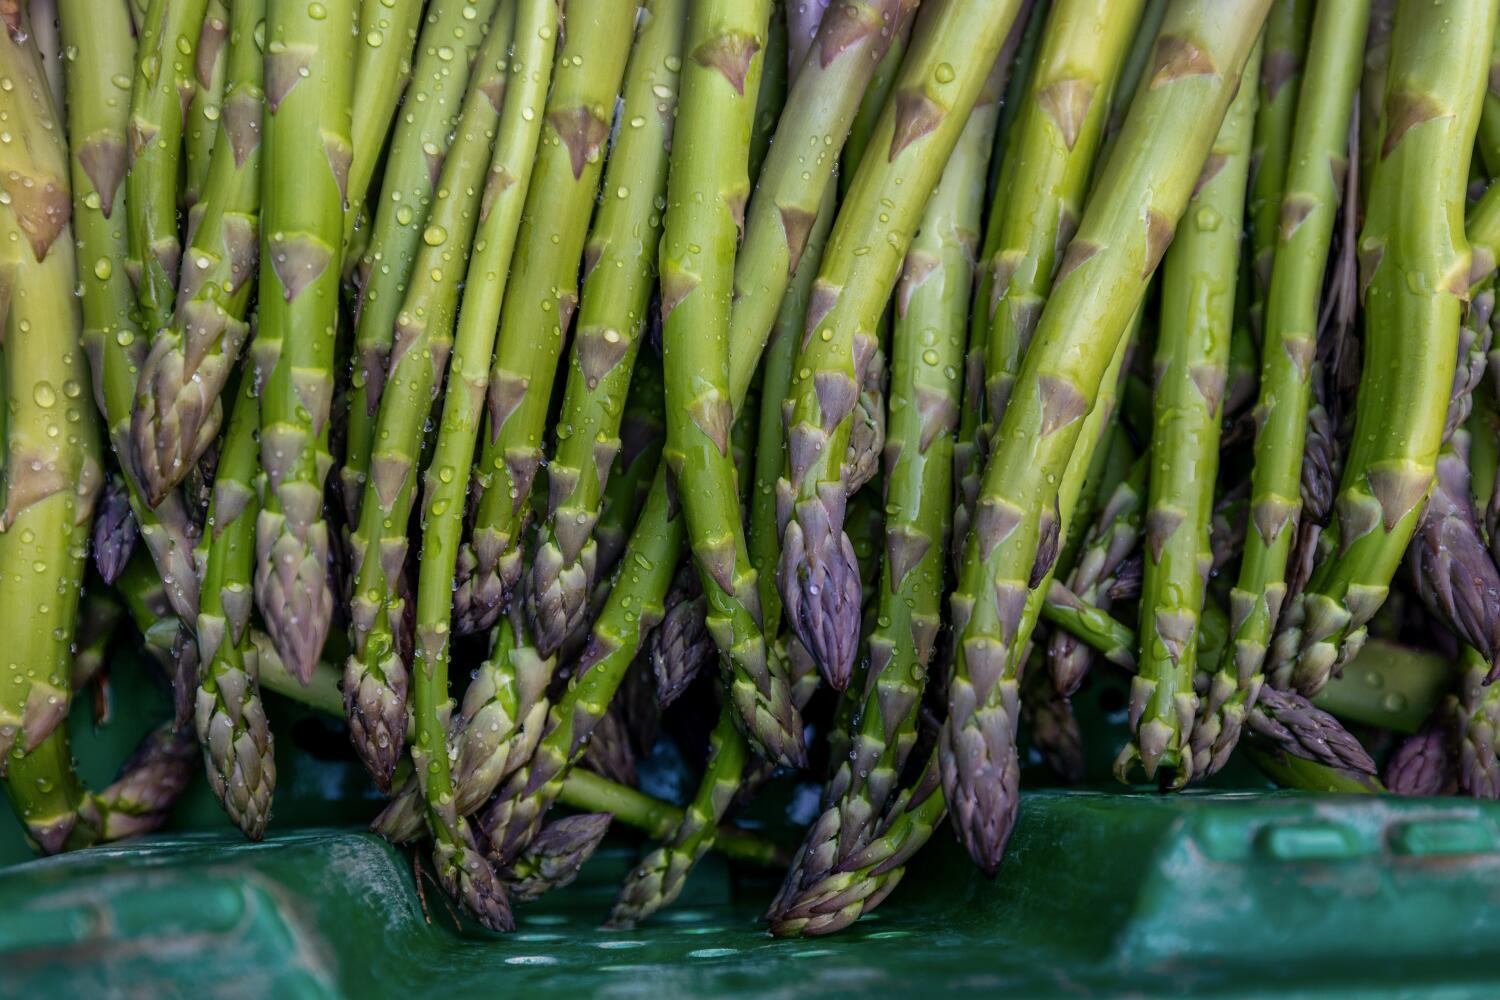 Image for display with article titled Fast-Growing Asparagus Once Flourished on California Farms. Why Is It Disappearing?